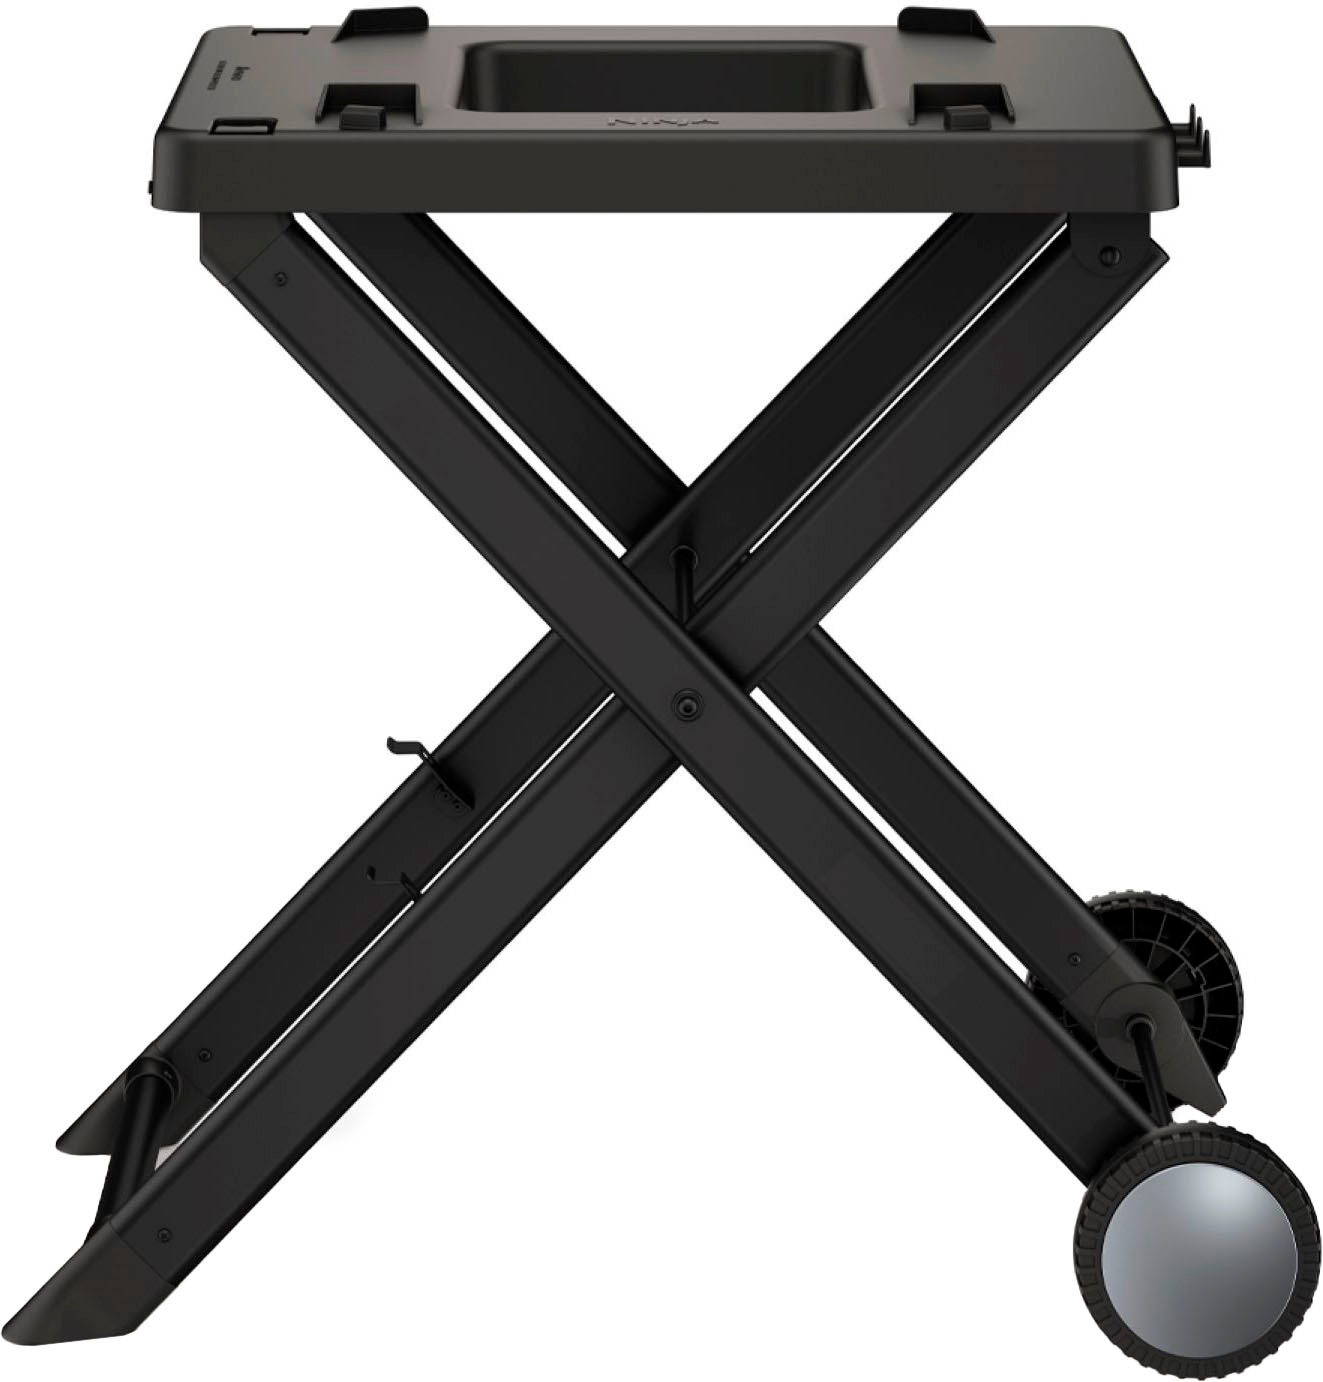 Angle View: Ninja Woodfire Collapsible Outdoor Grill Stand, Compatible with Ninja Woodfire Grills (OG700 series) - Black